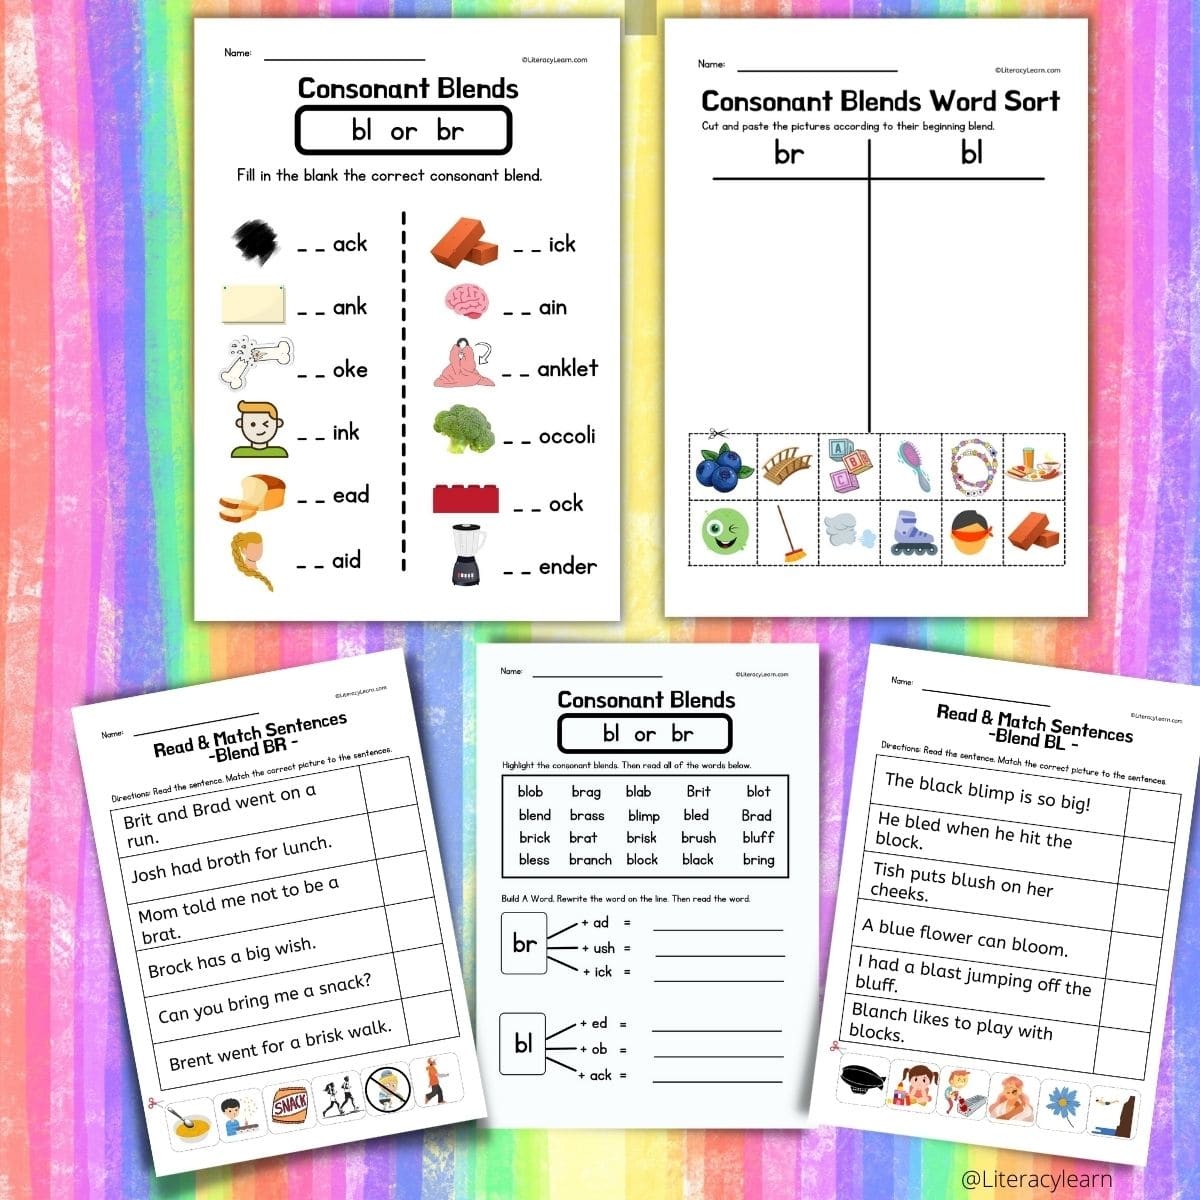 bl and br blends worksheets activities free literacy learn